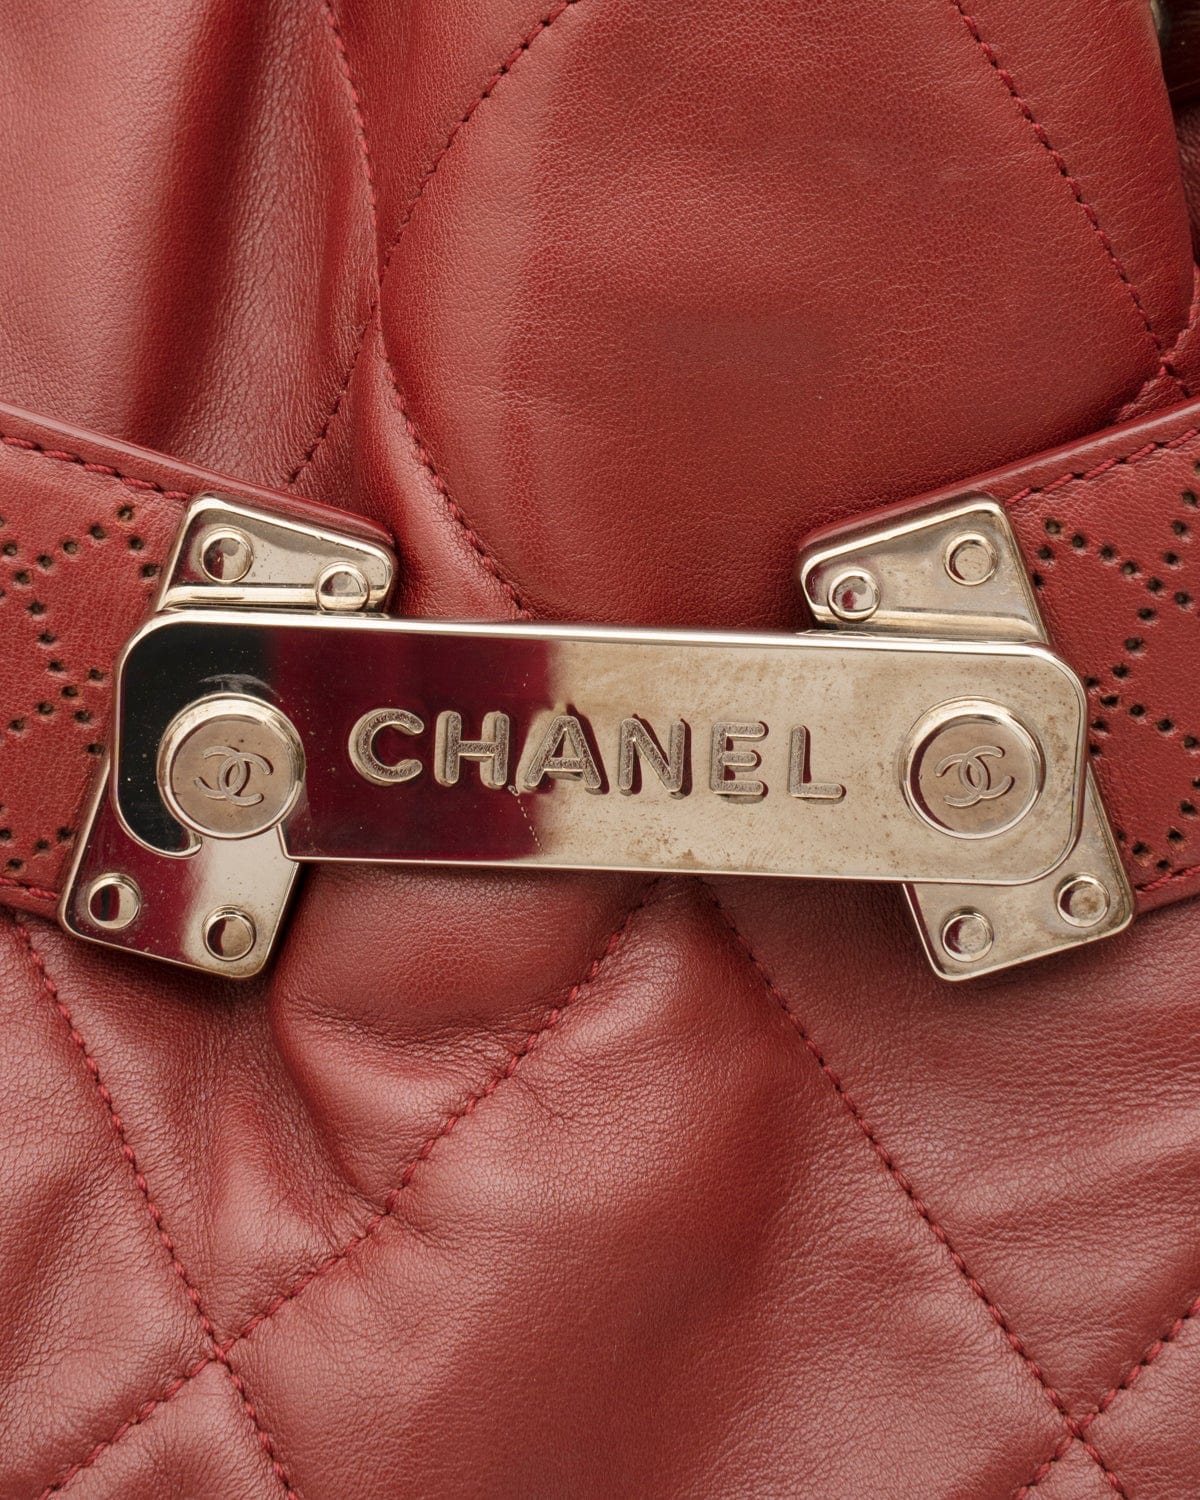 Chanel Chanel Burgundy Lambskin Leather Soft Tote Bag - AGL1518